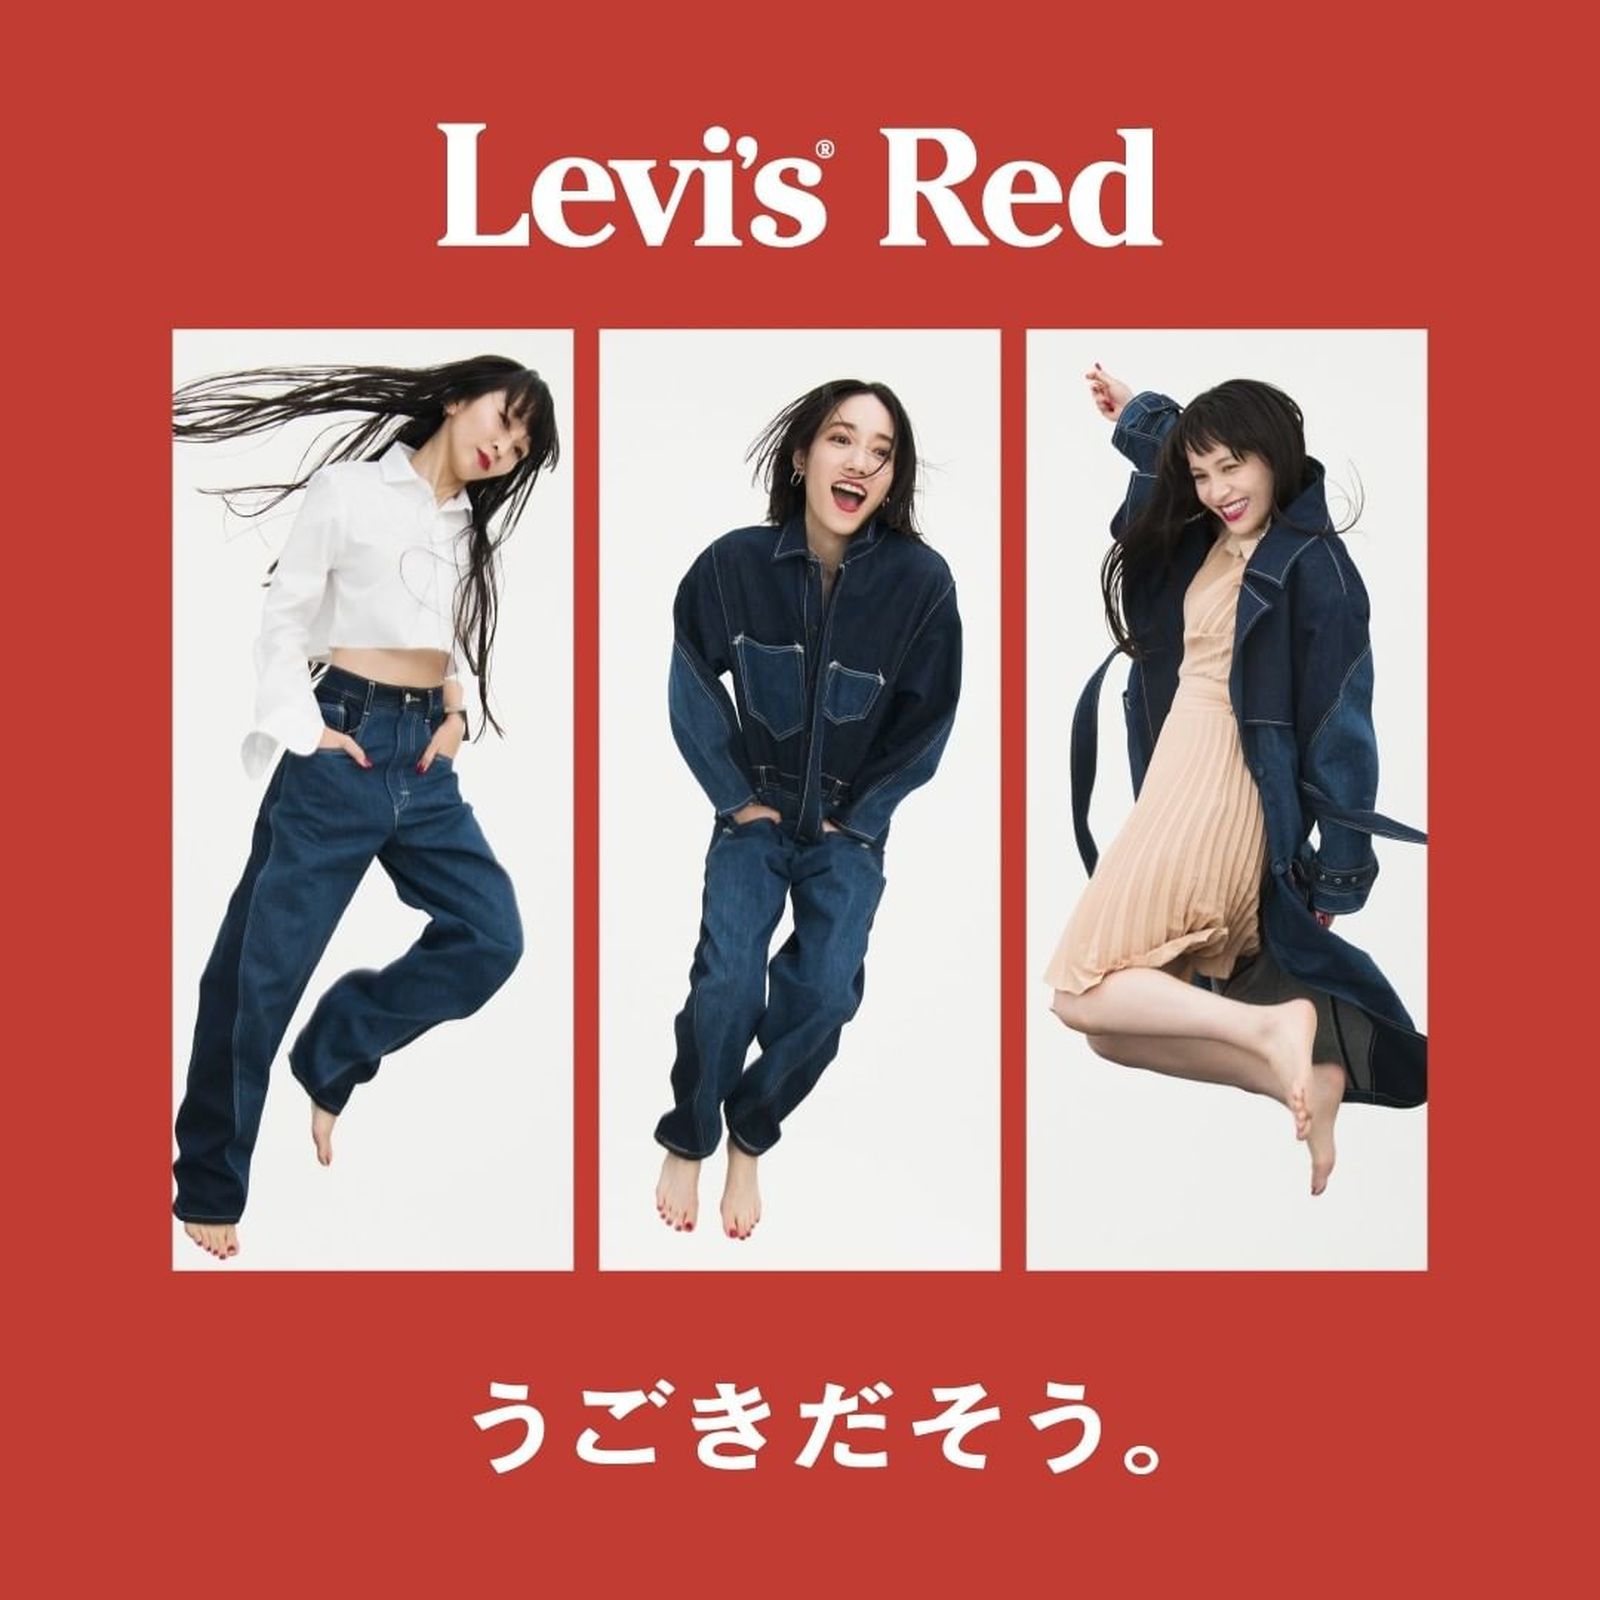 levis-red-fw21-collection (2)